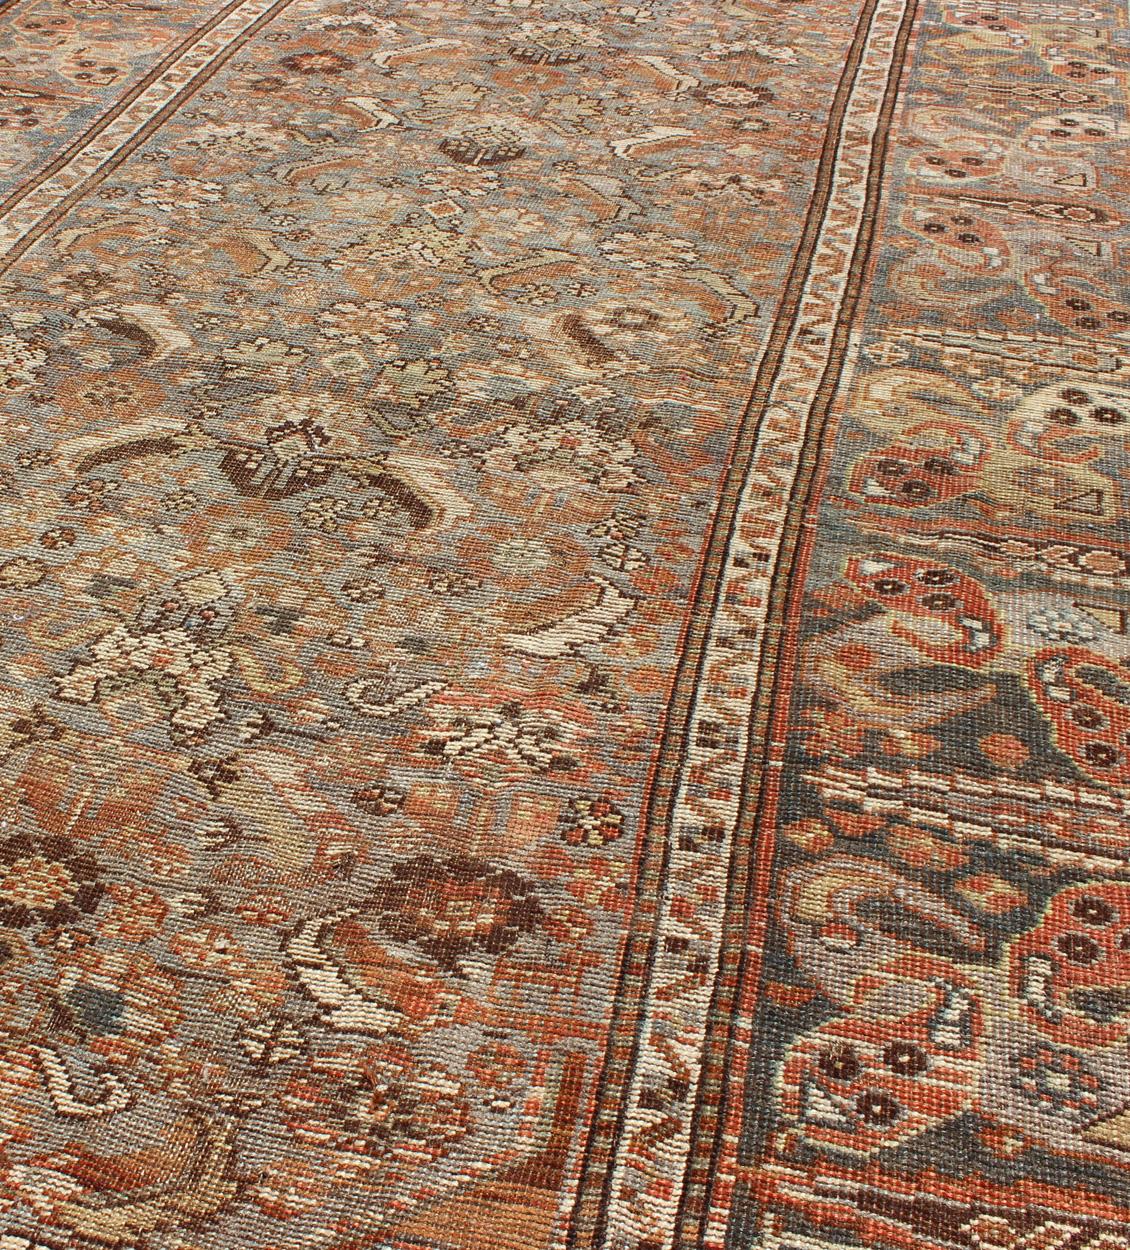 Early 20th Century Antique Persian Qashqai Small Gallery Rug with Expansive Sub-Geometric Design